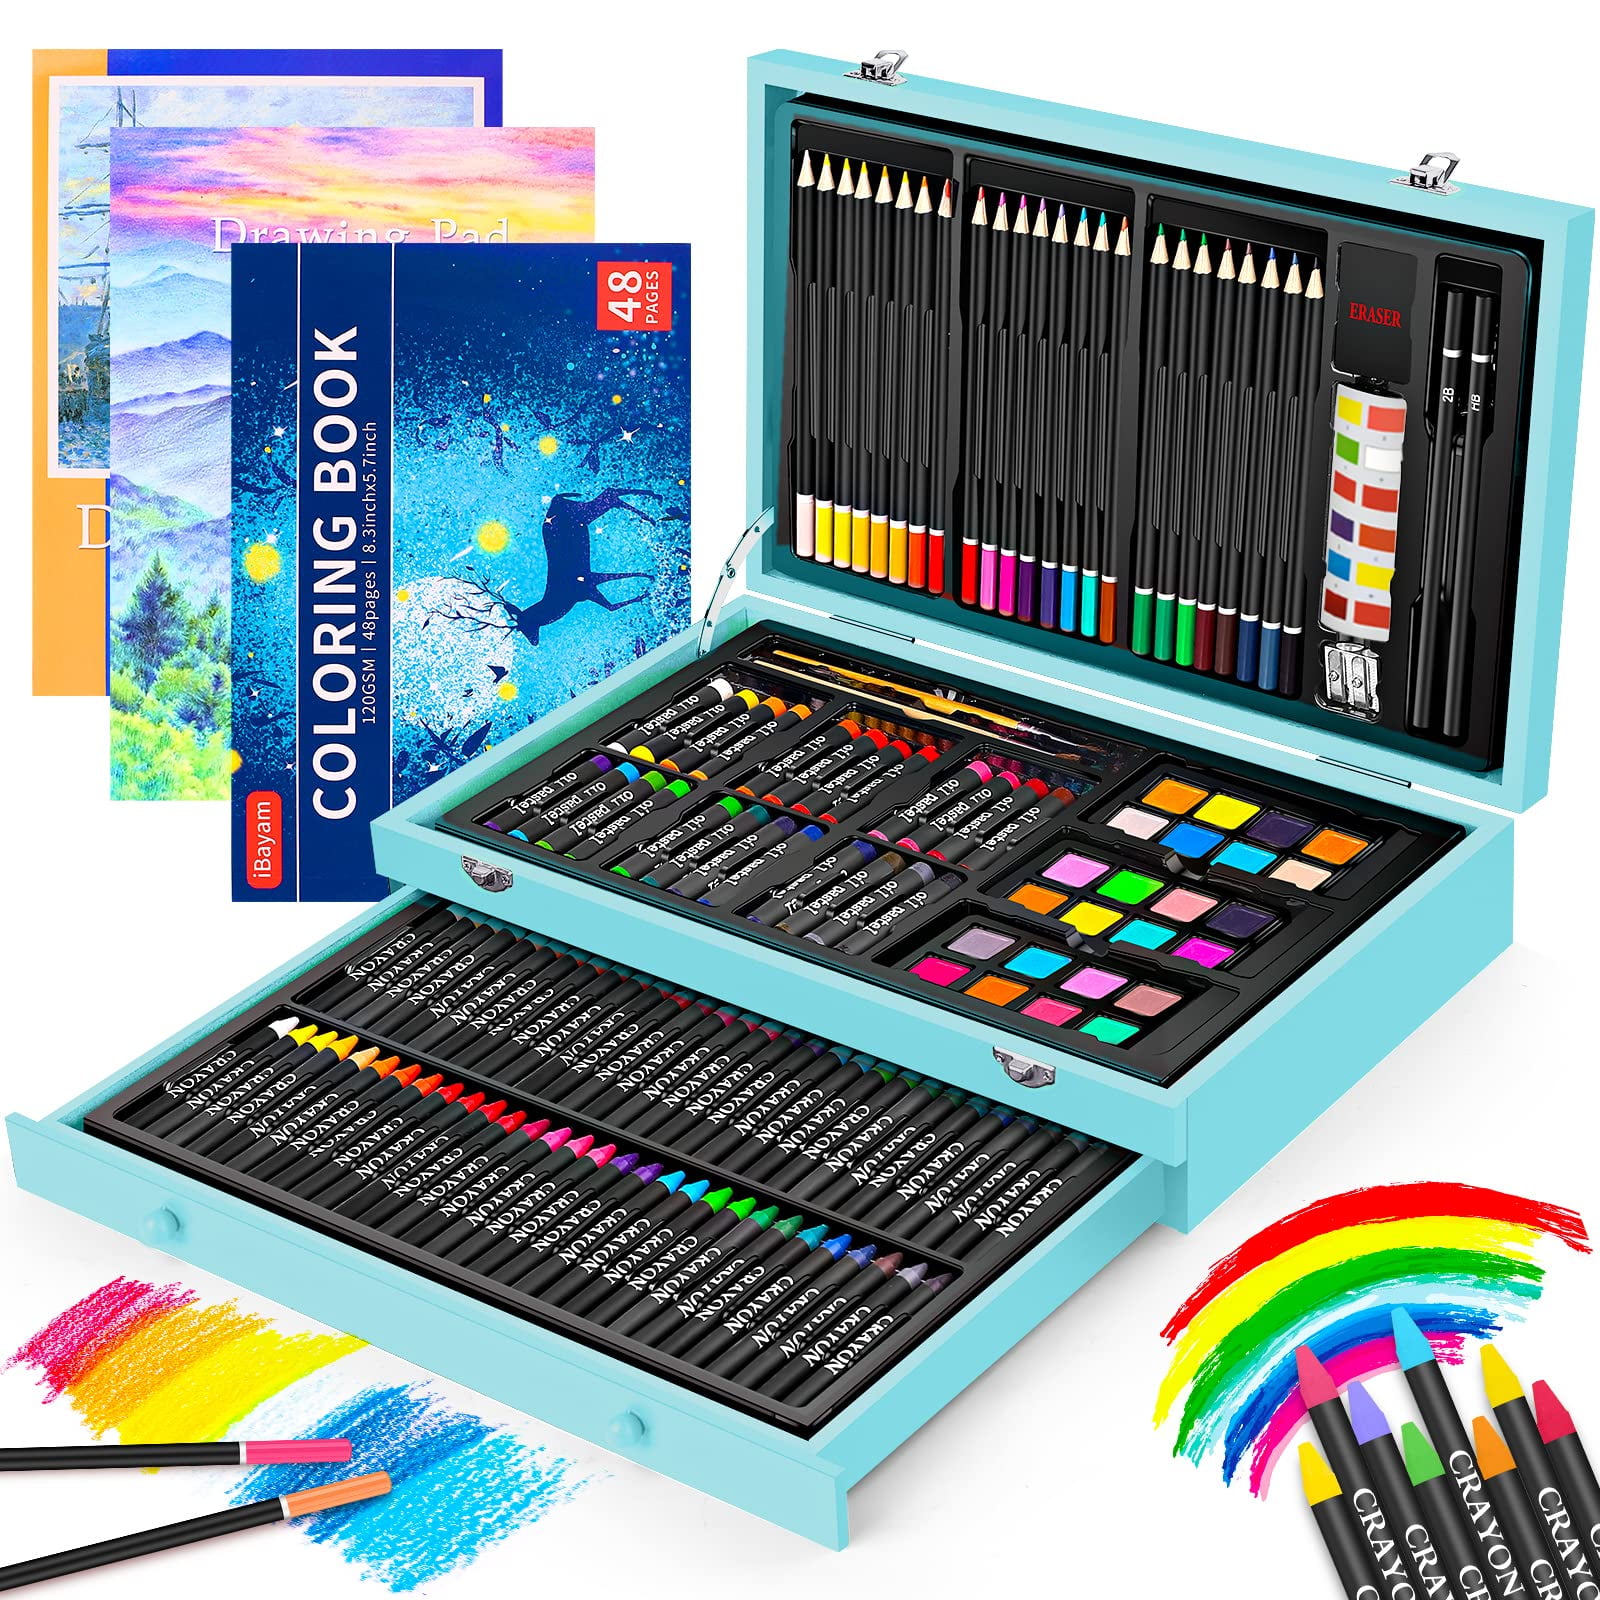 150 Piece Deluxe Art Set, Casewin Art Supplies for Drawing, Painting and  More, Kid Crafting Supplies Great for Teenage 4 5 6 7 8 9 10 11 12 13 Years